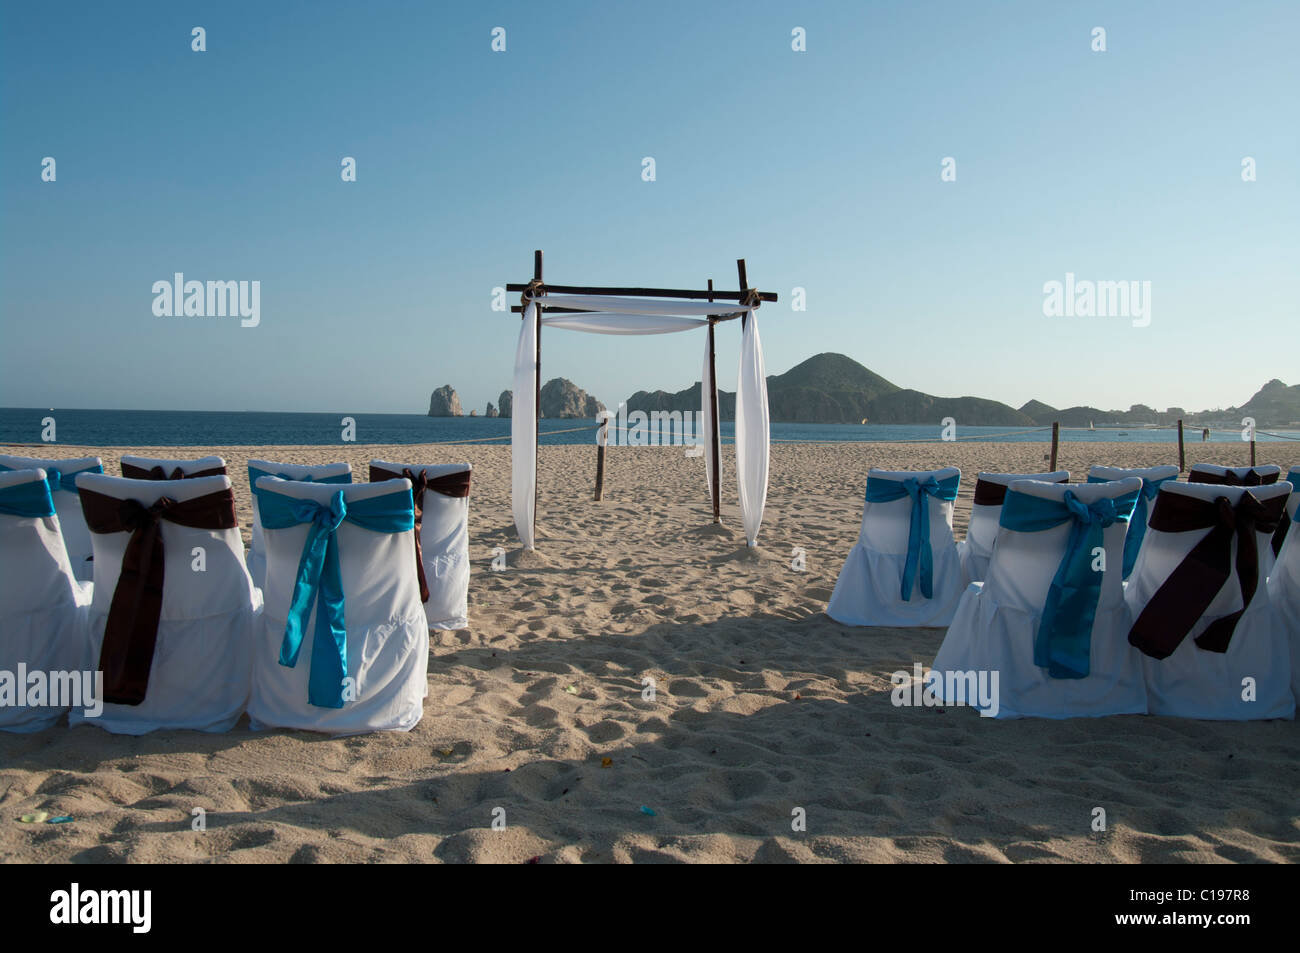 A deserted beach set up for a wedding ceremony.  The chair covers are white with blue and brown bows. An arch awaits the couple. Stock Photo